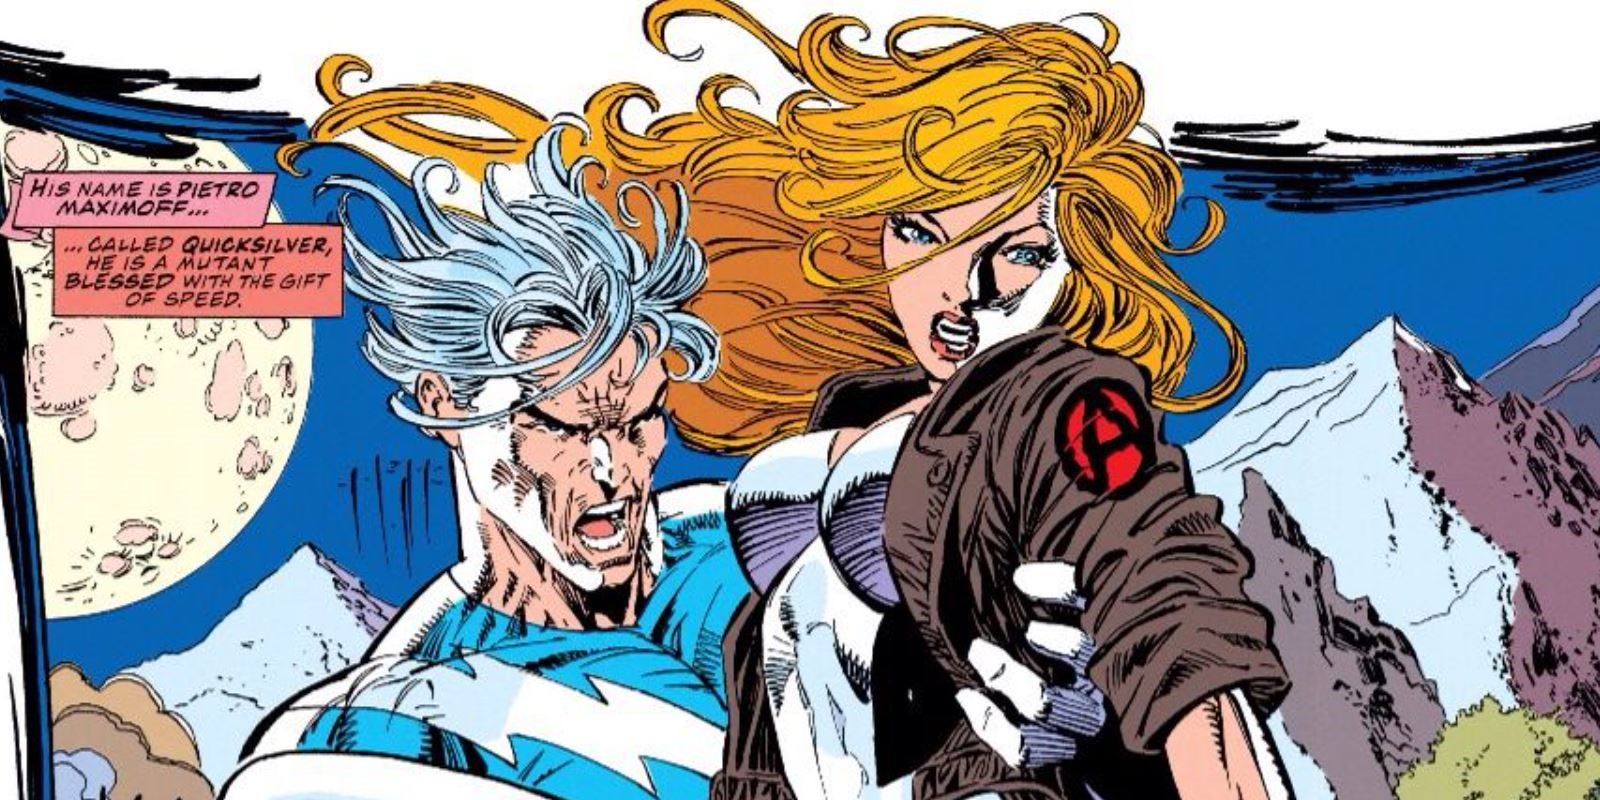 Quicksilver runs with Crystal in Marvel Comics.